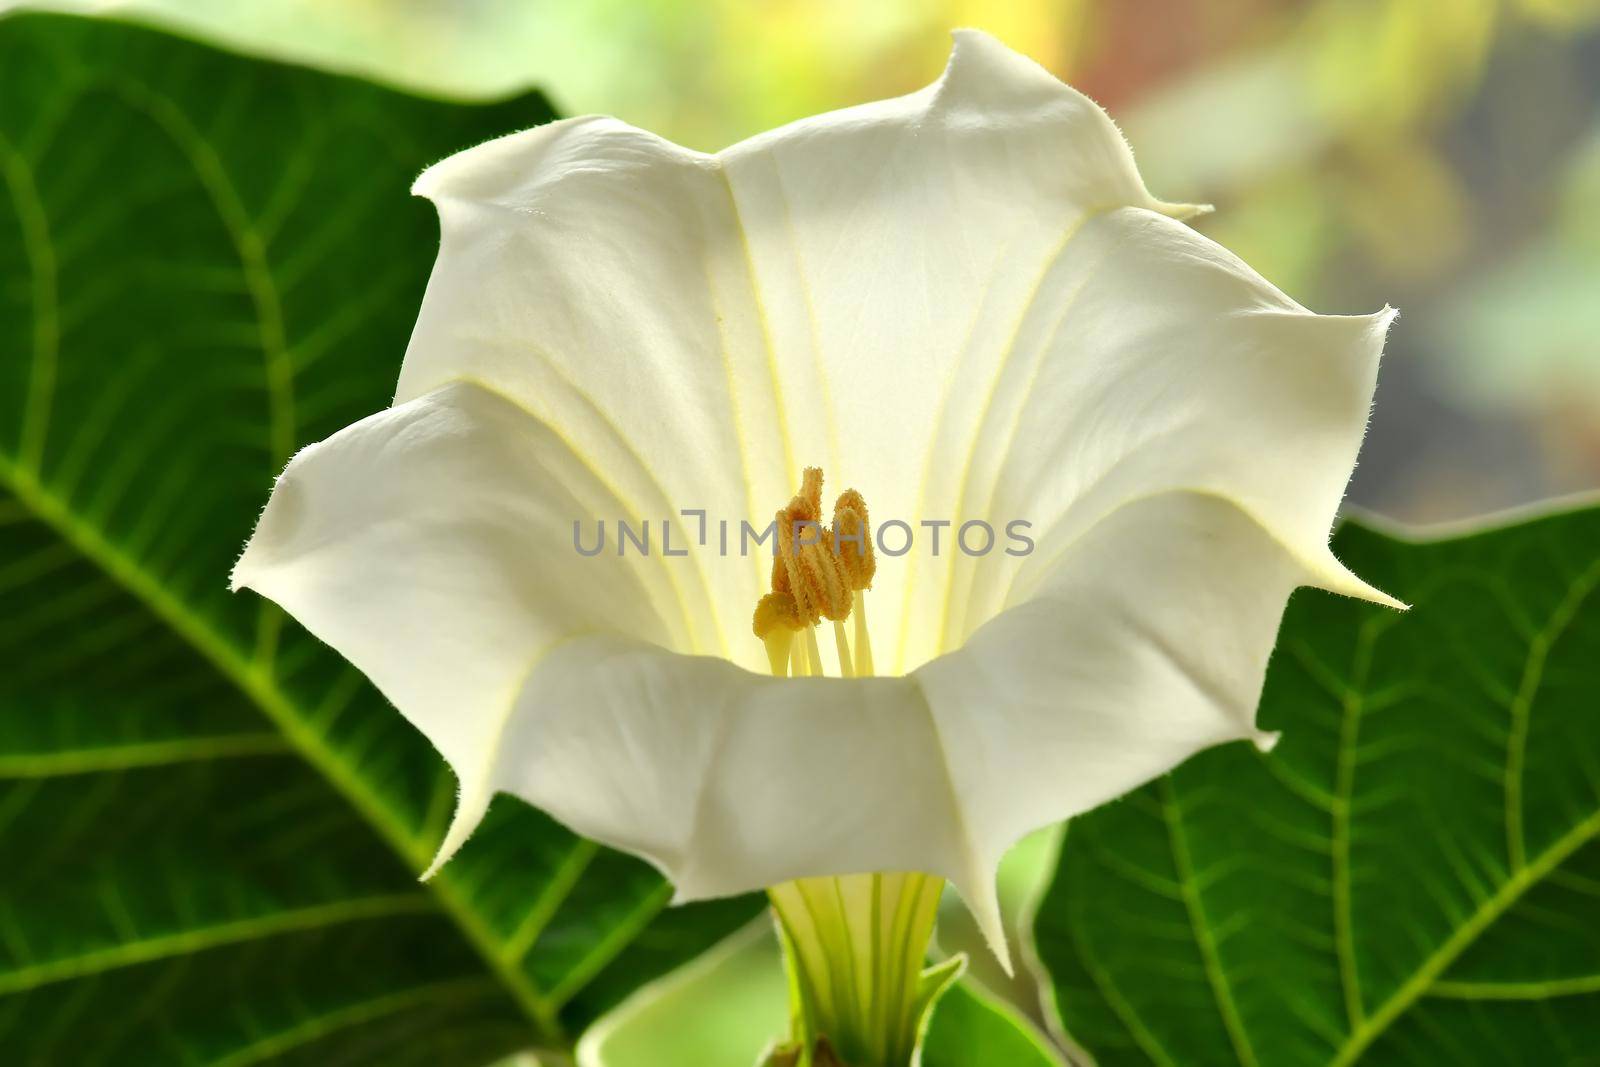 thorn apple with white flower